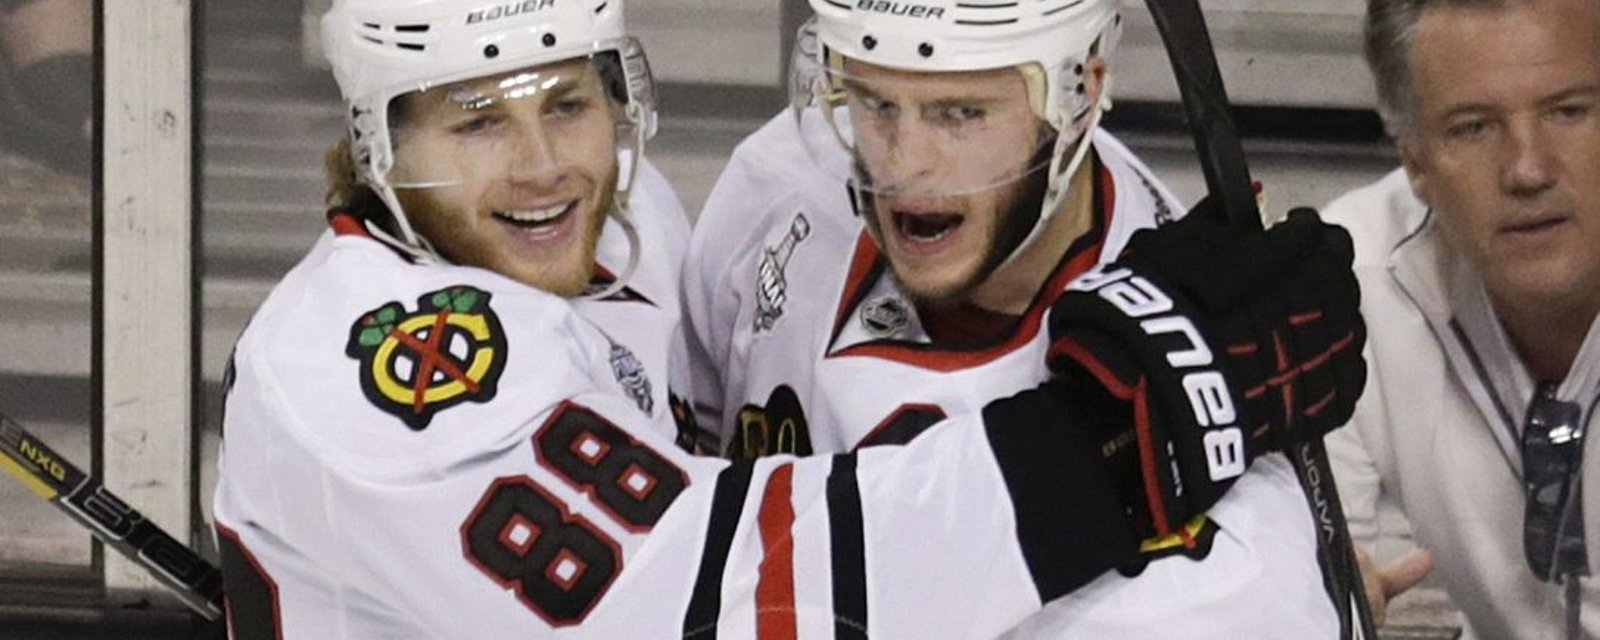 Patrick Kane reveals what teammates told Toews as he’s forced to miss season 